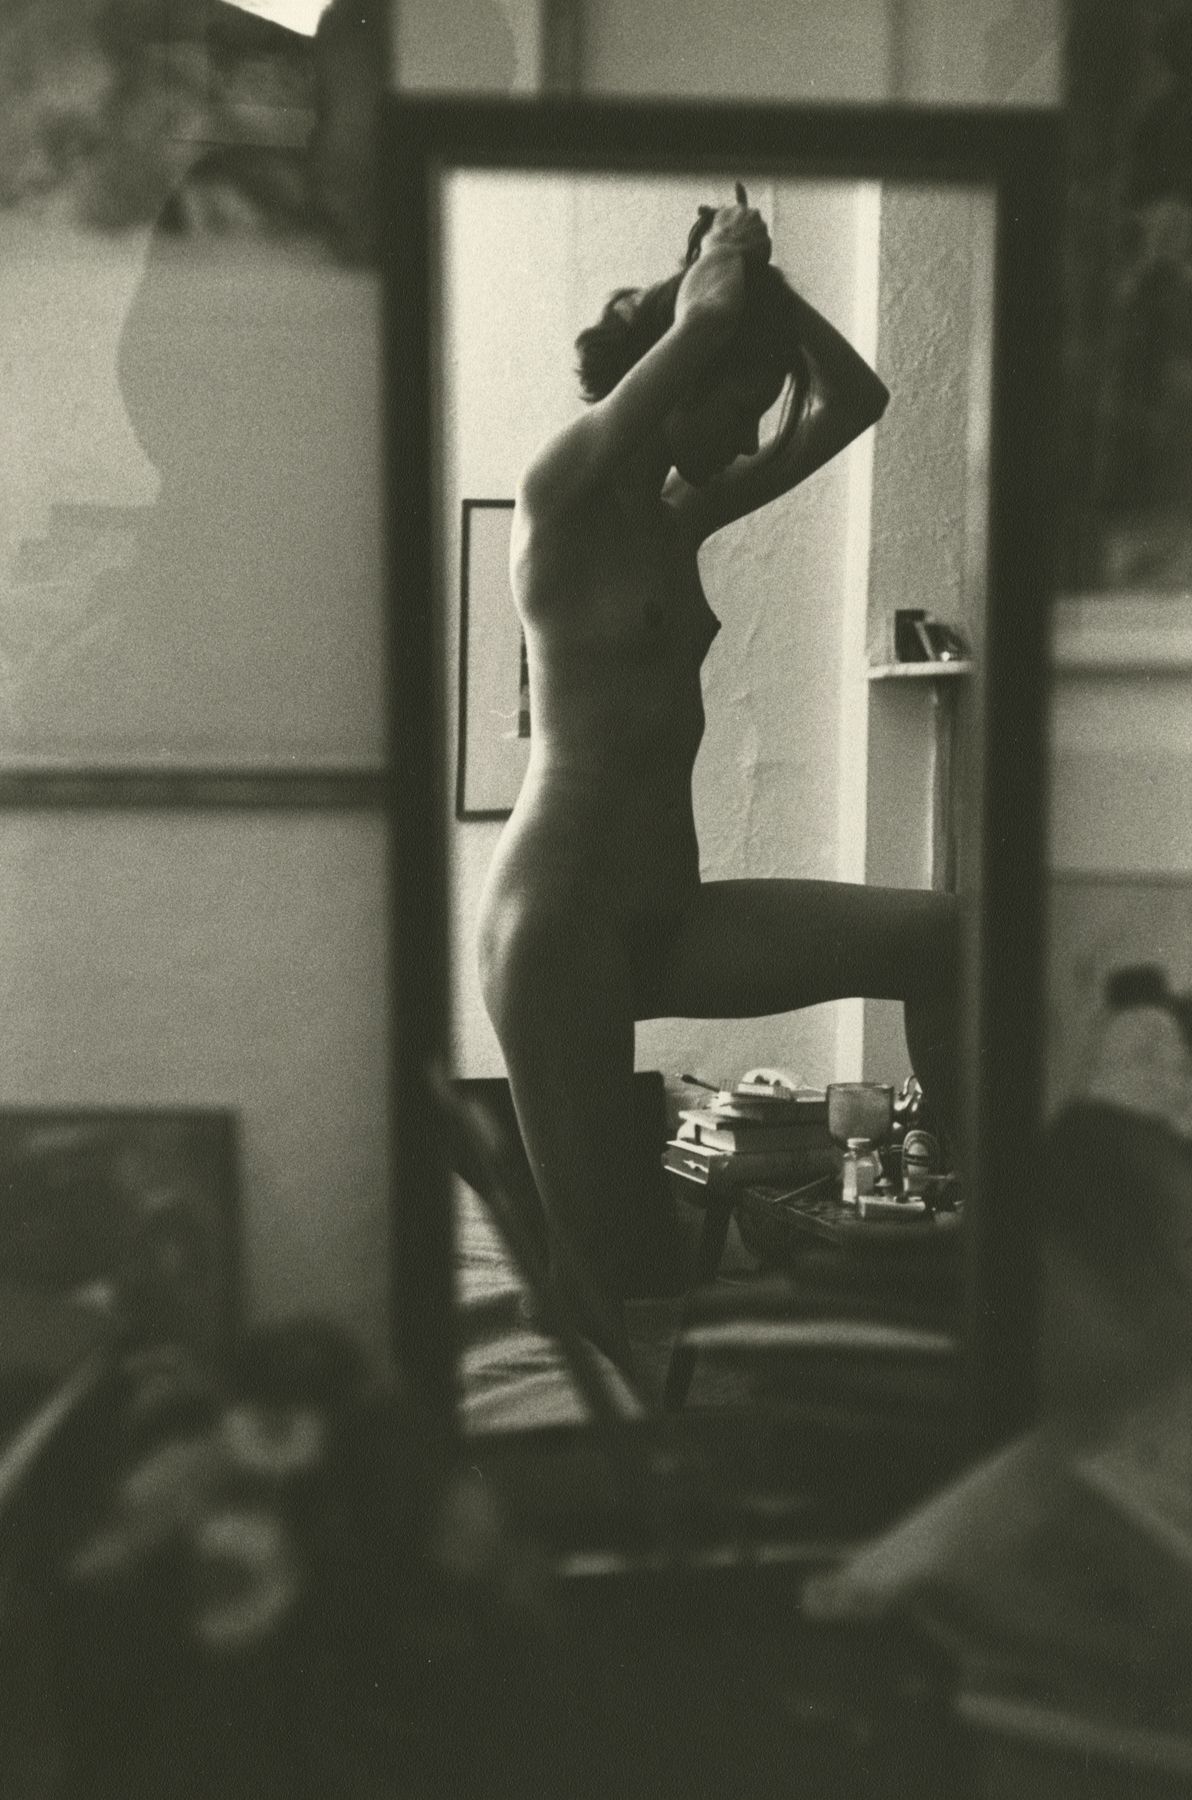 All Images © Saul Leiter / Howard Greenberg Gallery